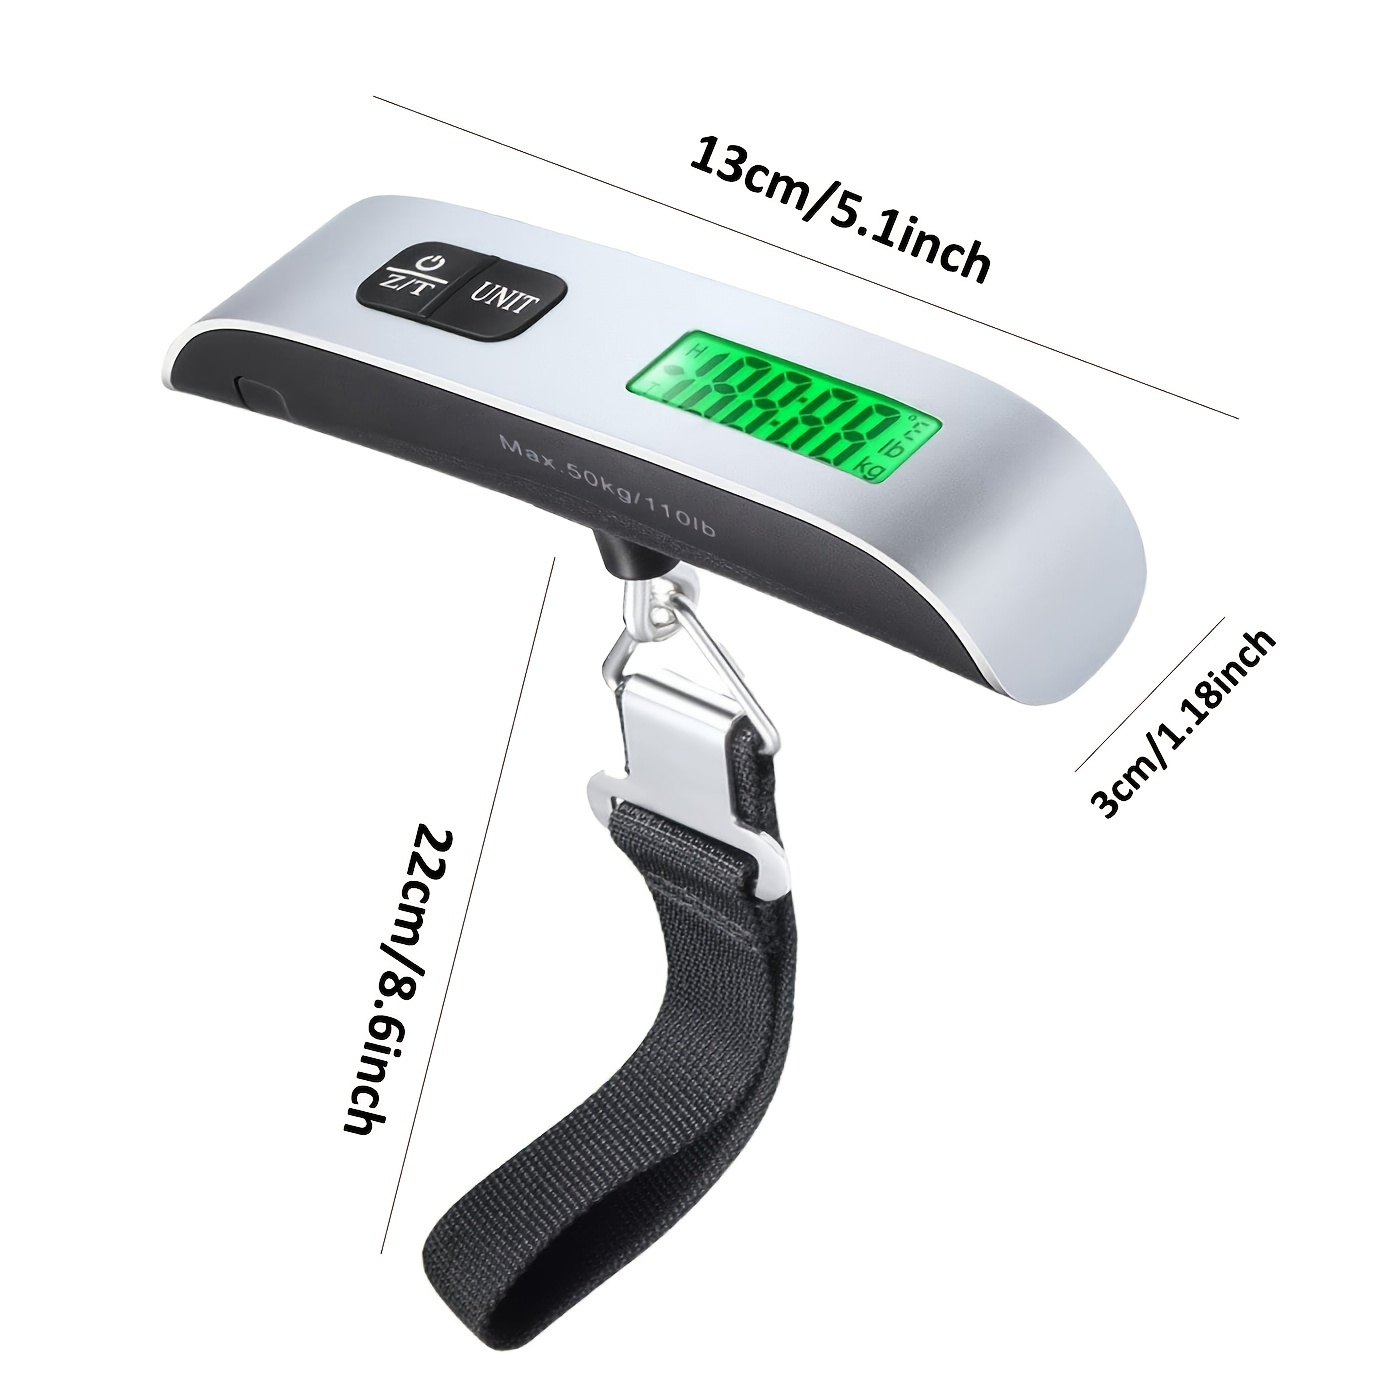 Digital Luggage Scale Gift for Traveler Suitcase Handheld Weight Scale  110lbs